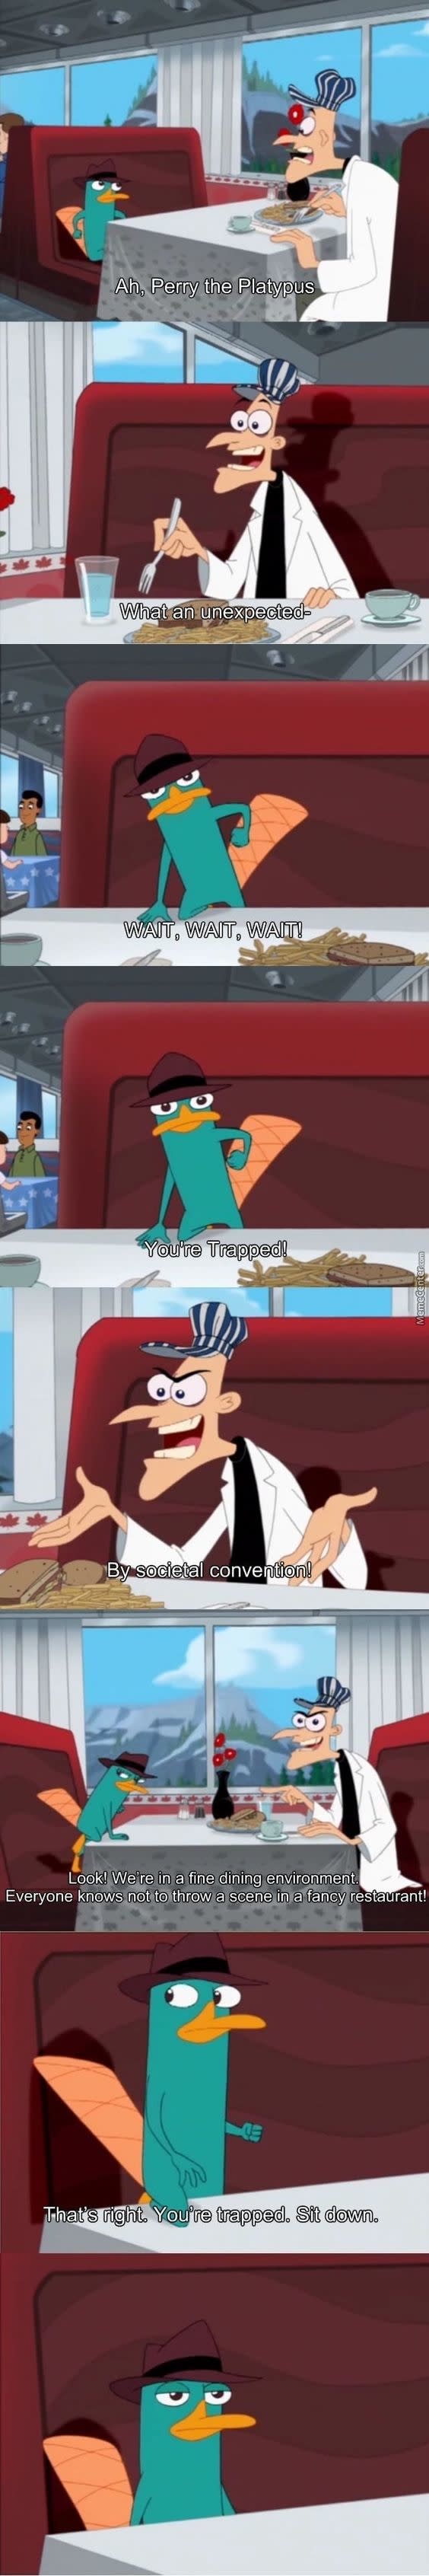 Animated characters from "Phineas and Ferb" engaging in conversation, including Perry the Platypus as Agent P